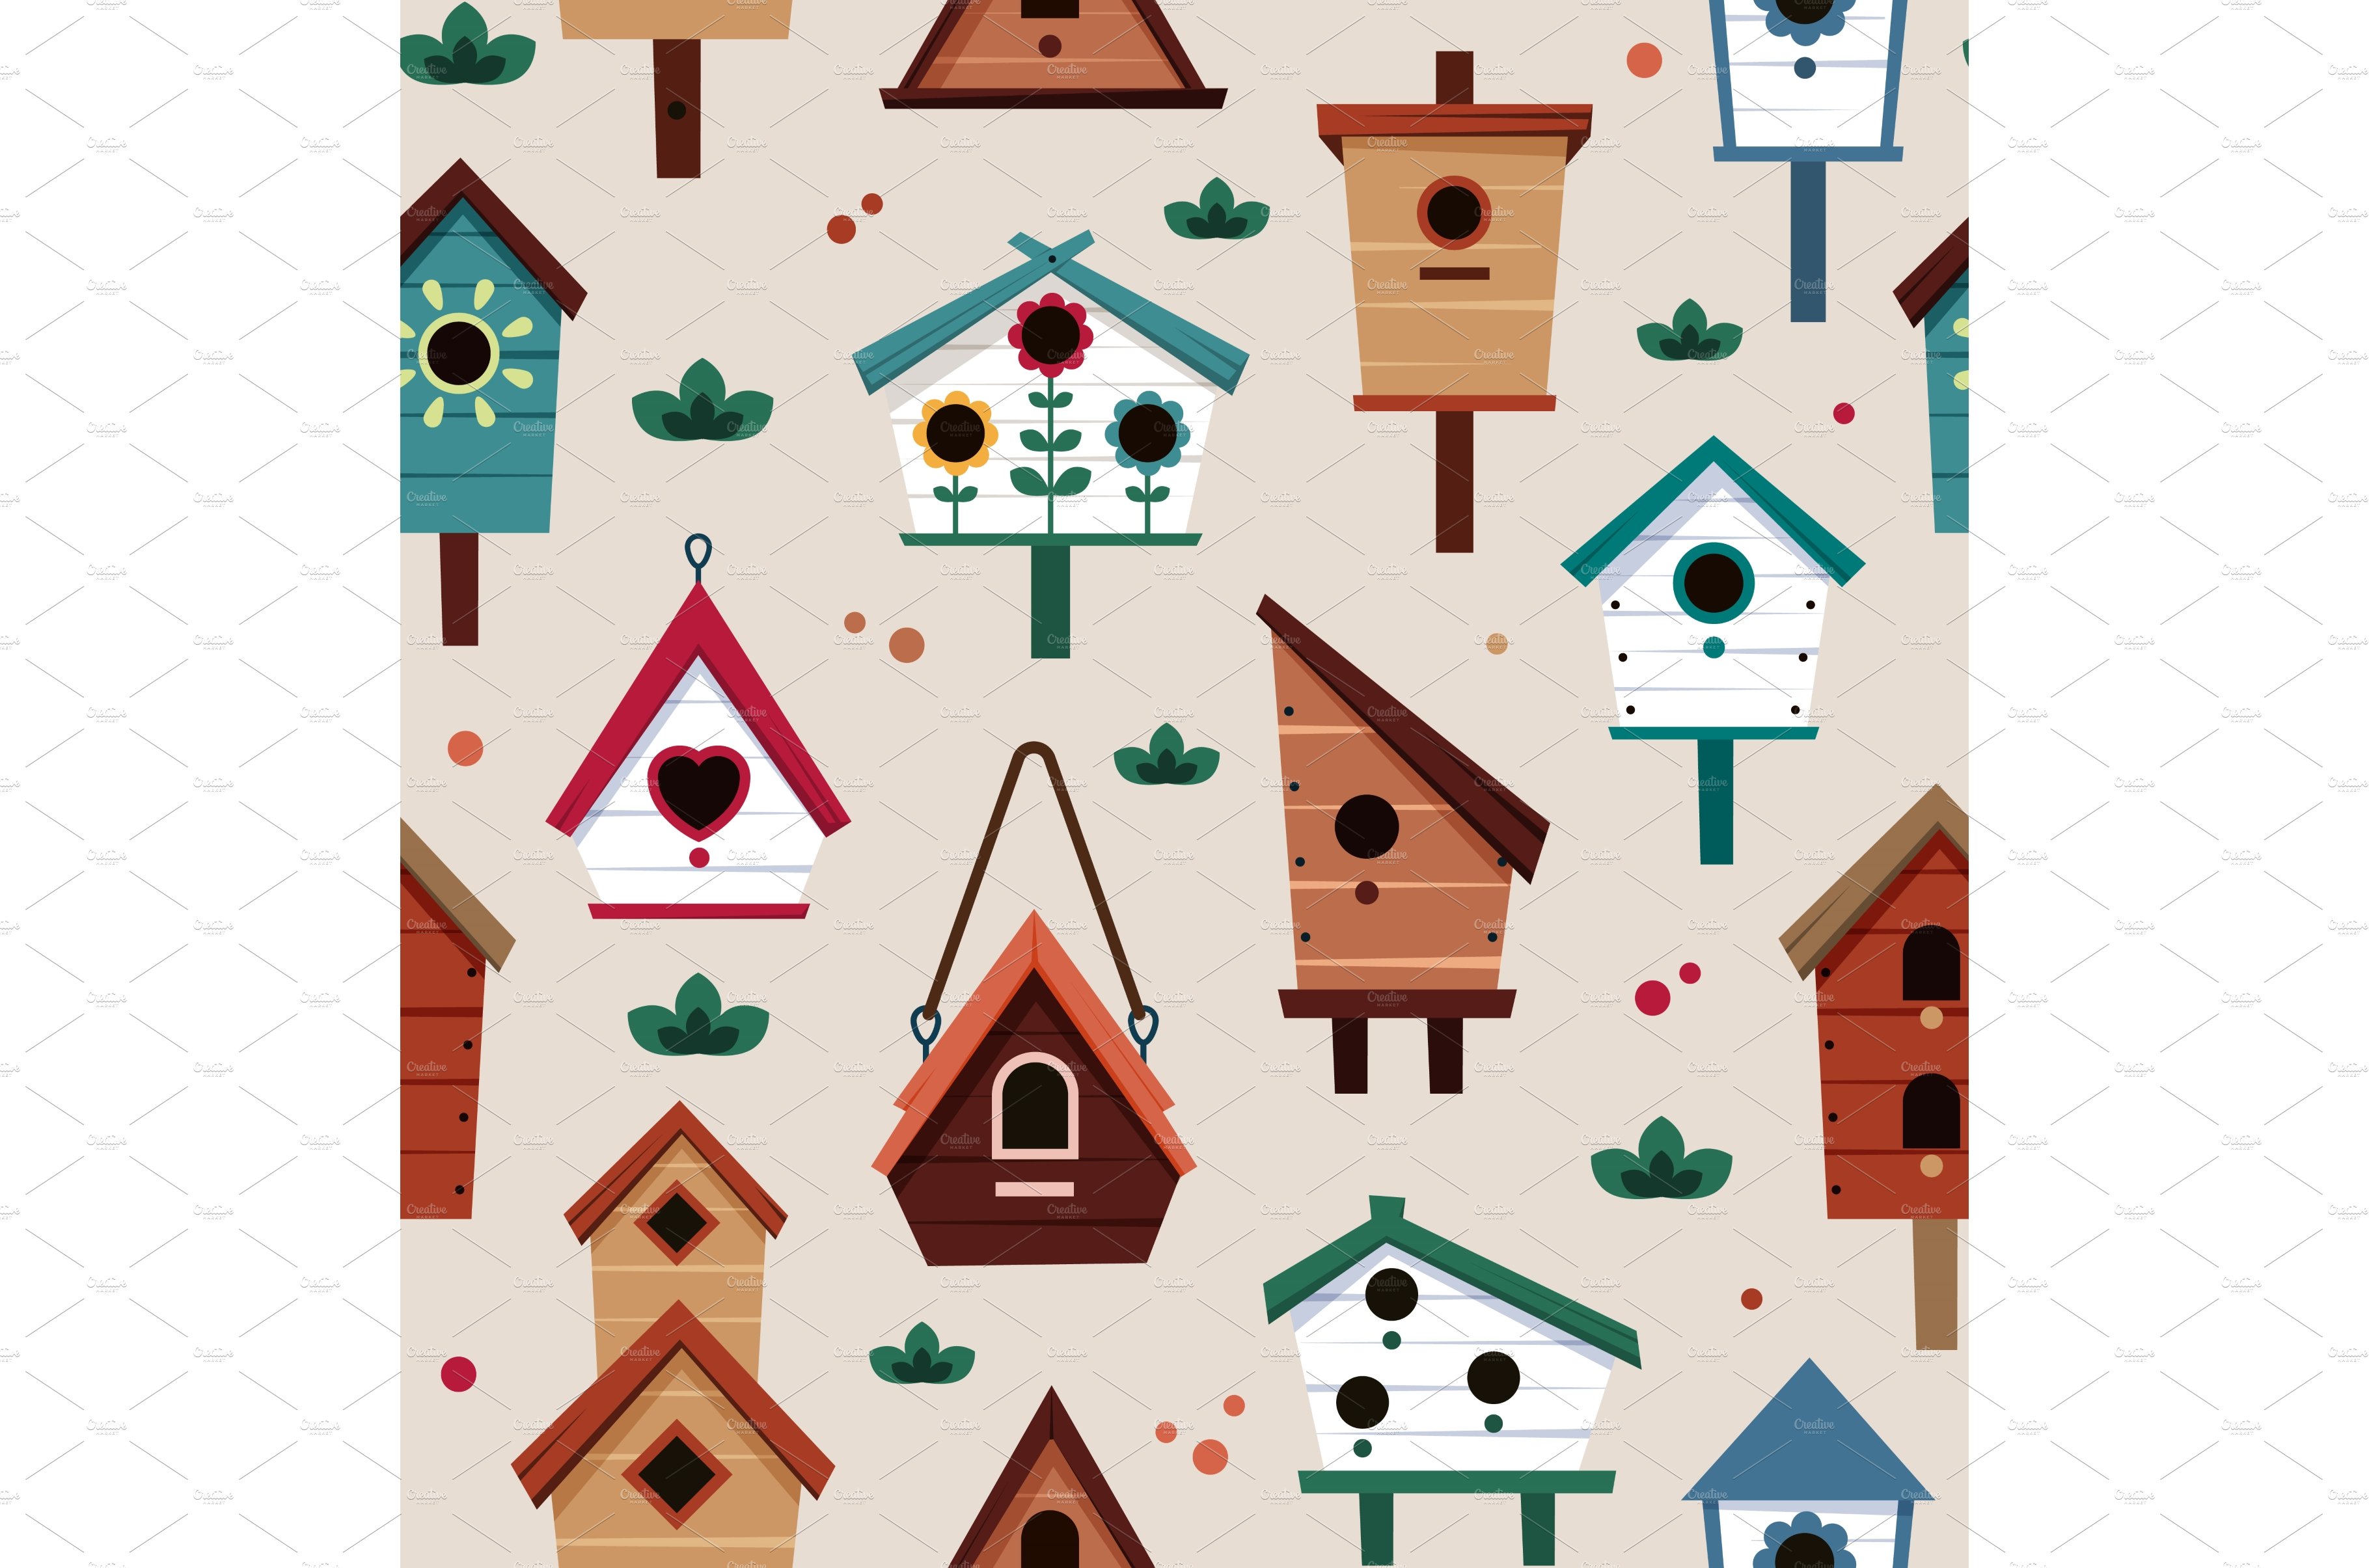 birdhouse pattern. roofing wooden cover image.